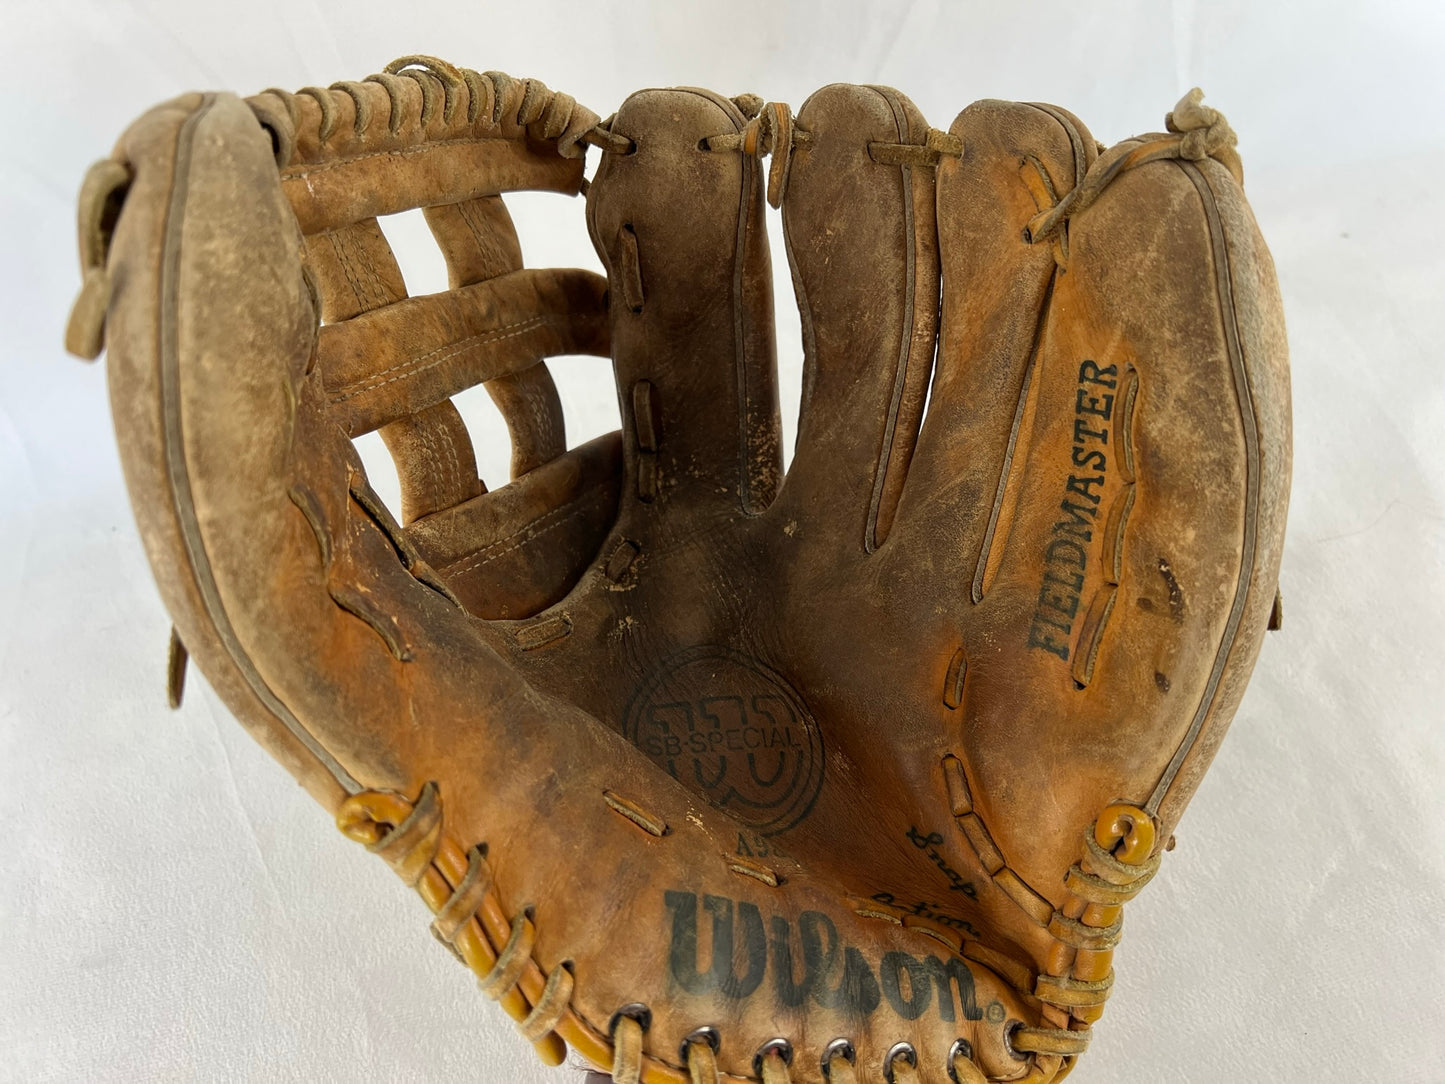 Baseball Glove Adult Size 12.5 inch Wilson Fieldmaster Tan Leather Fits on Left Hand